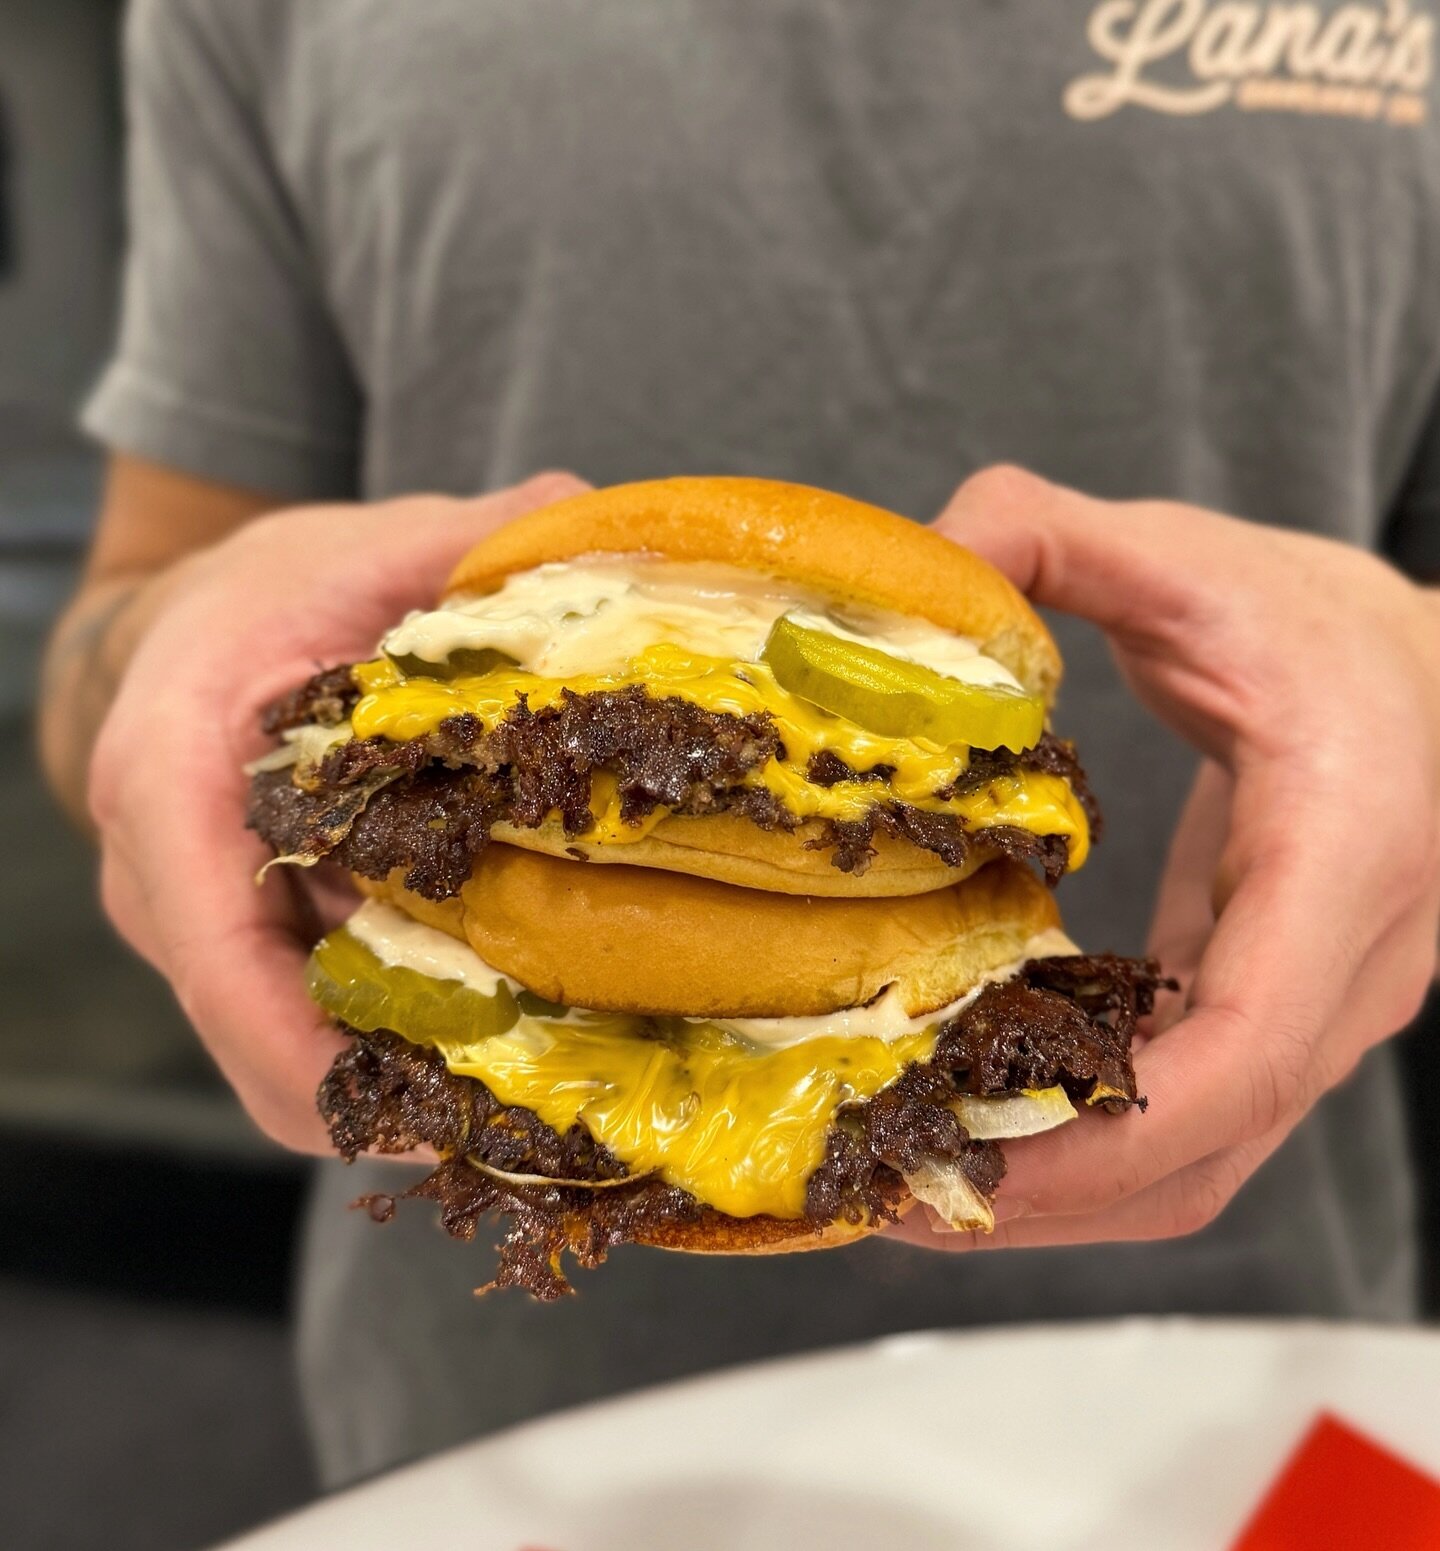 🍔 The crowd favorite is here to stay! Introducing the &lsquo;Okie Onion Smash&rsquo; &ndash; a permanent star on our menu. After its incredible run as December&rsquo;s special, we couldn&rsquo;t resist making it a year-round delight! Come taste what